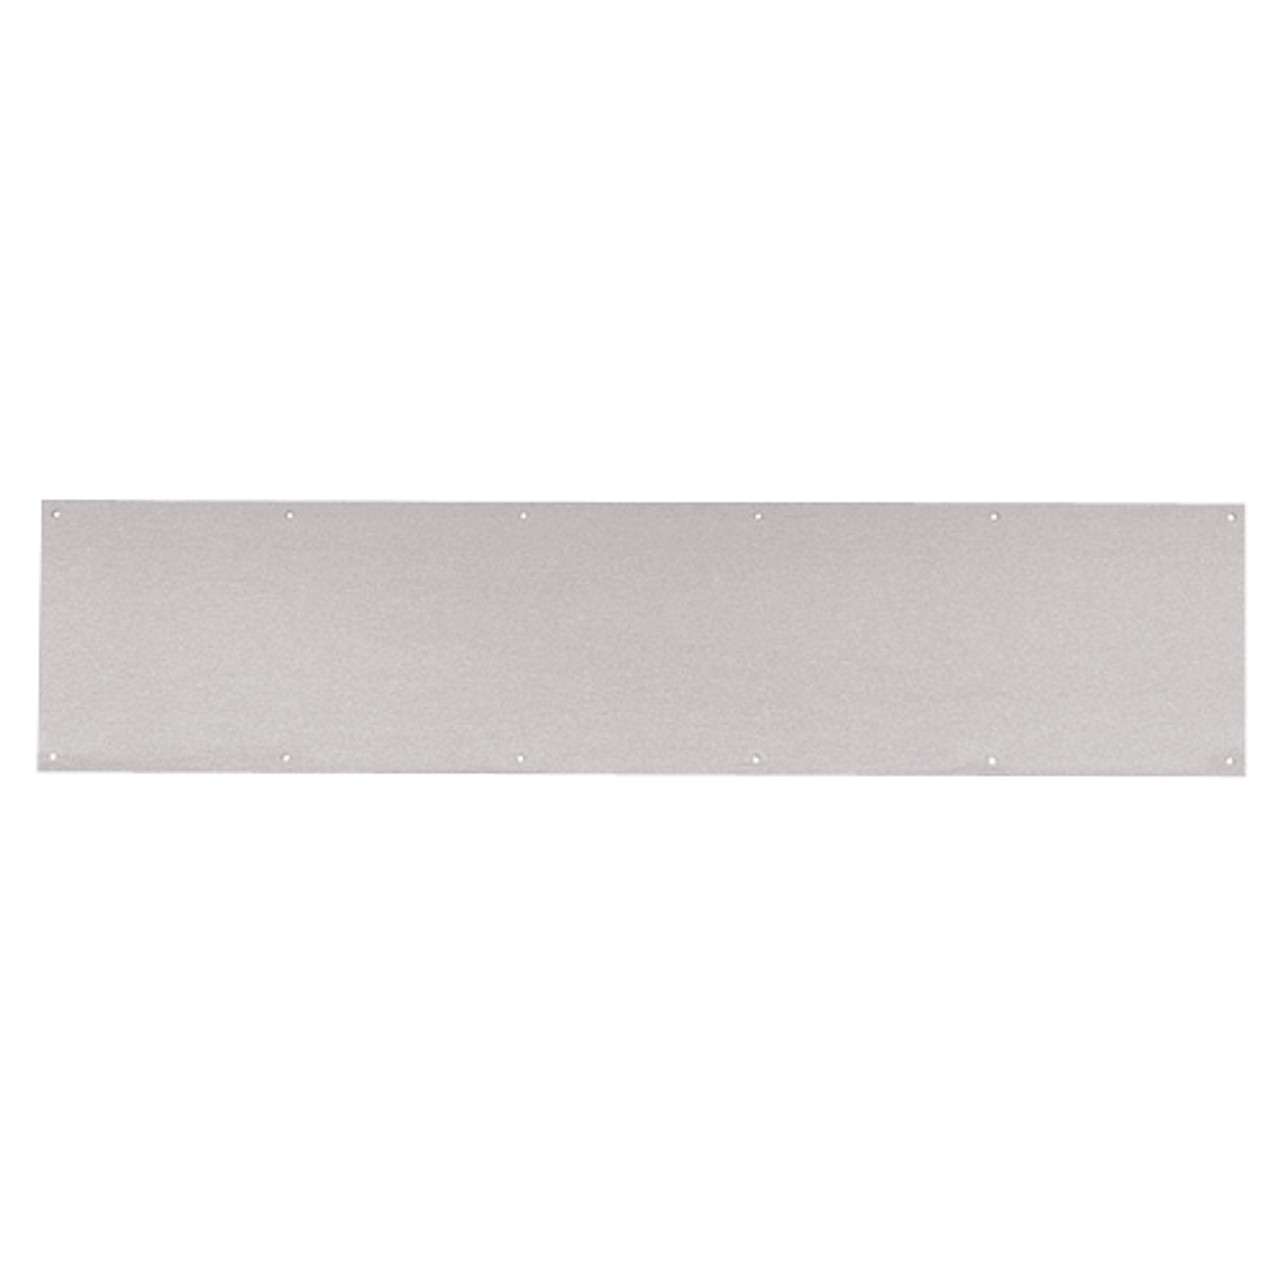 8400-US32D-9x34-B-CS Ives 8400 Series Protection Plate in Satin Stainless Steel